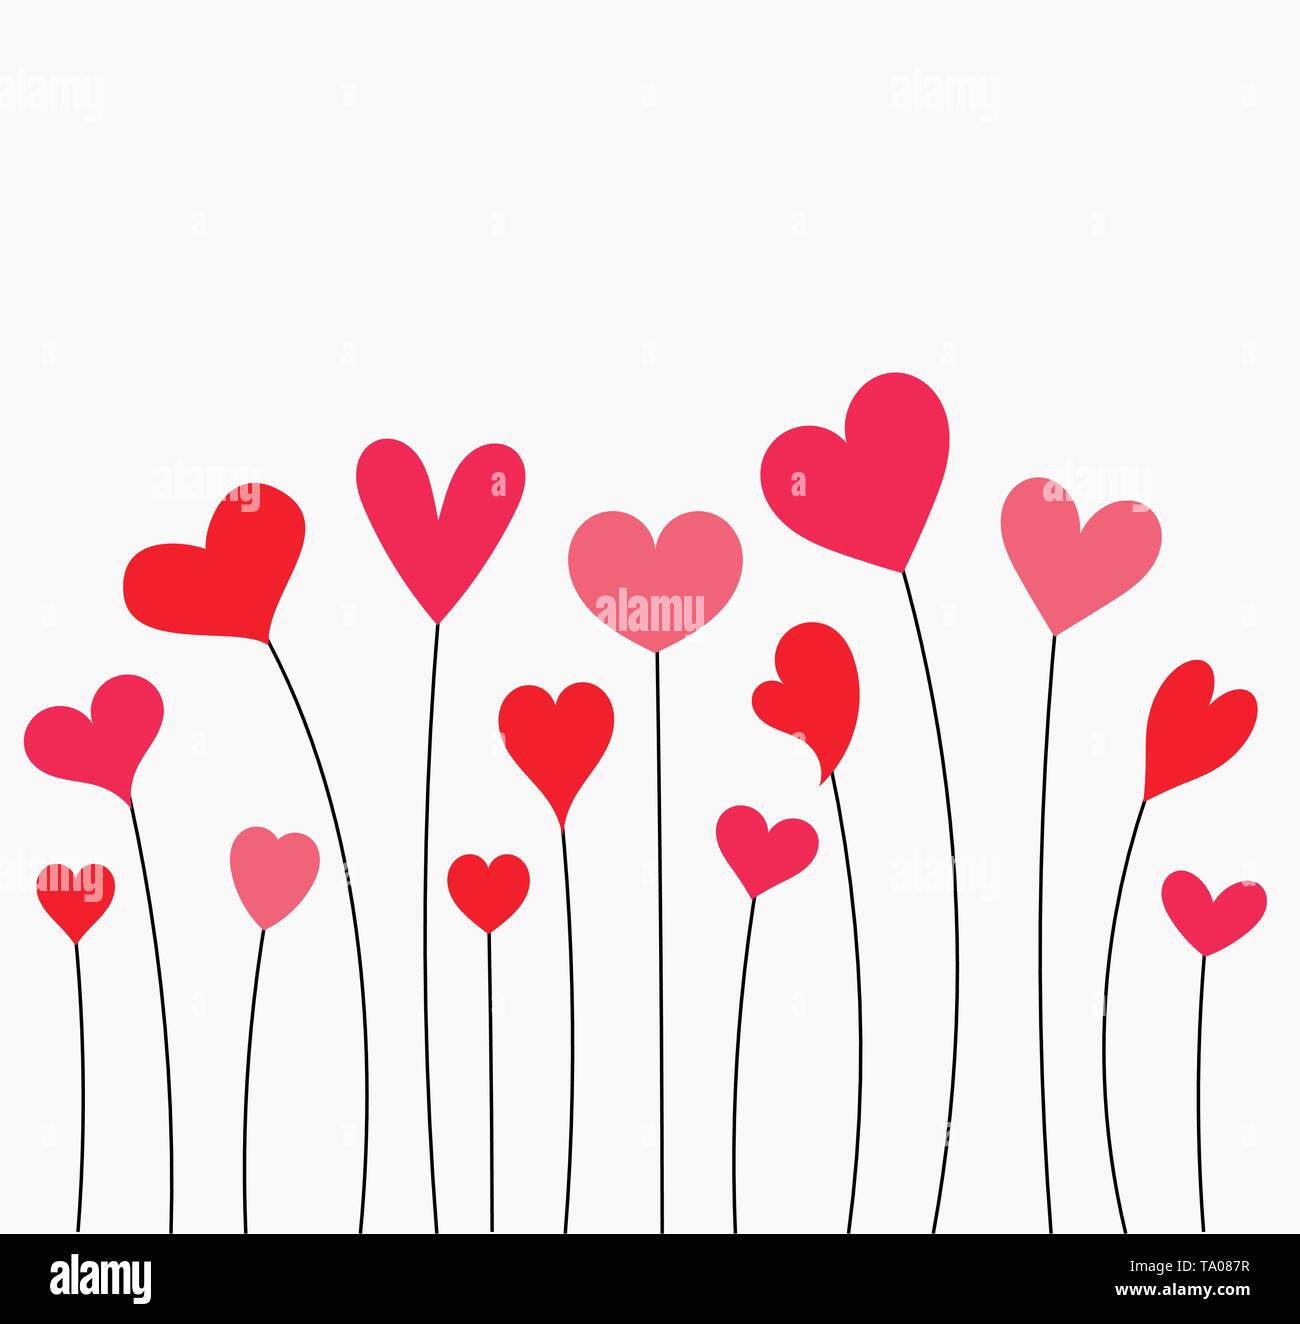 Cute red and pink hearts Valentine's Day background illustration Stock ...